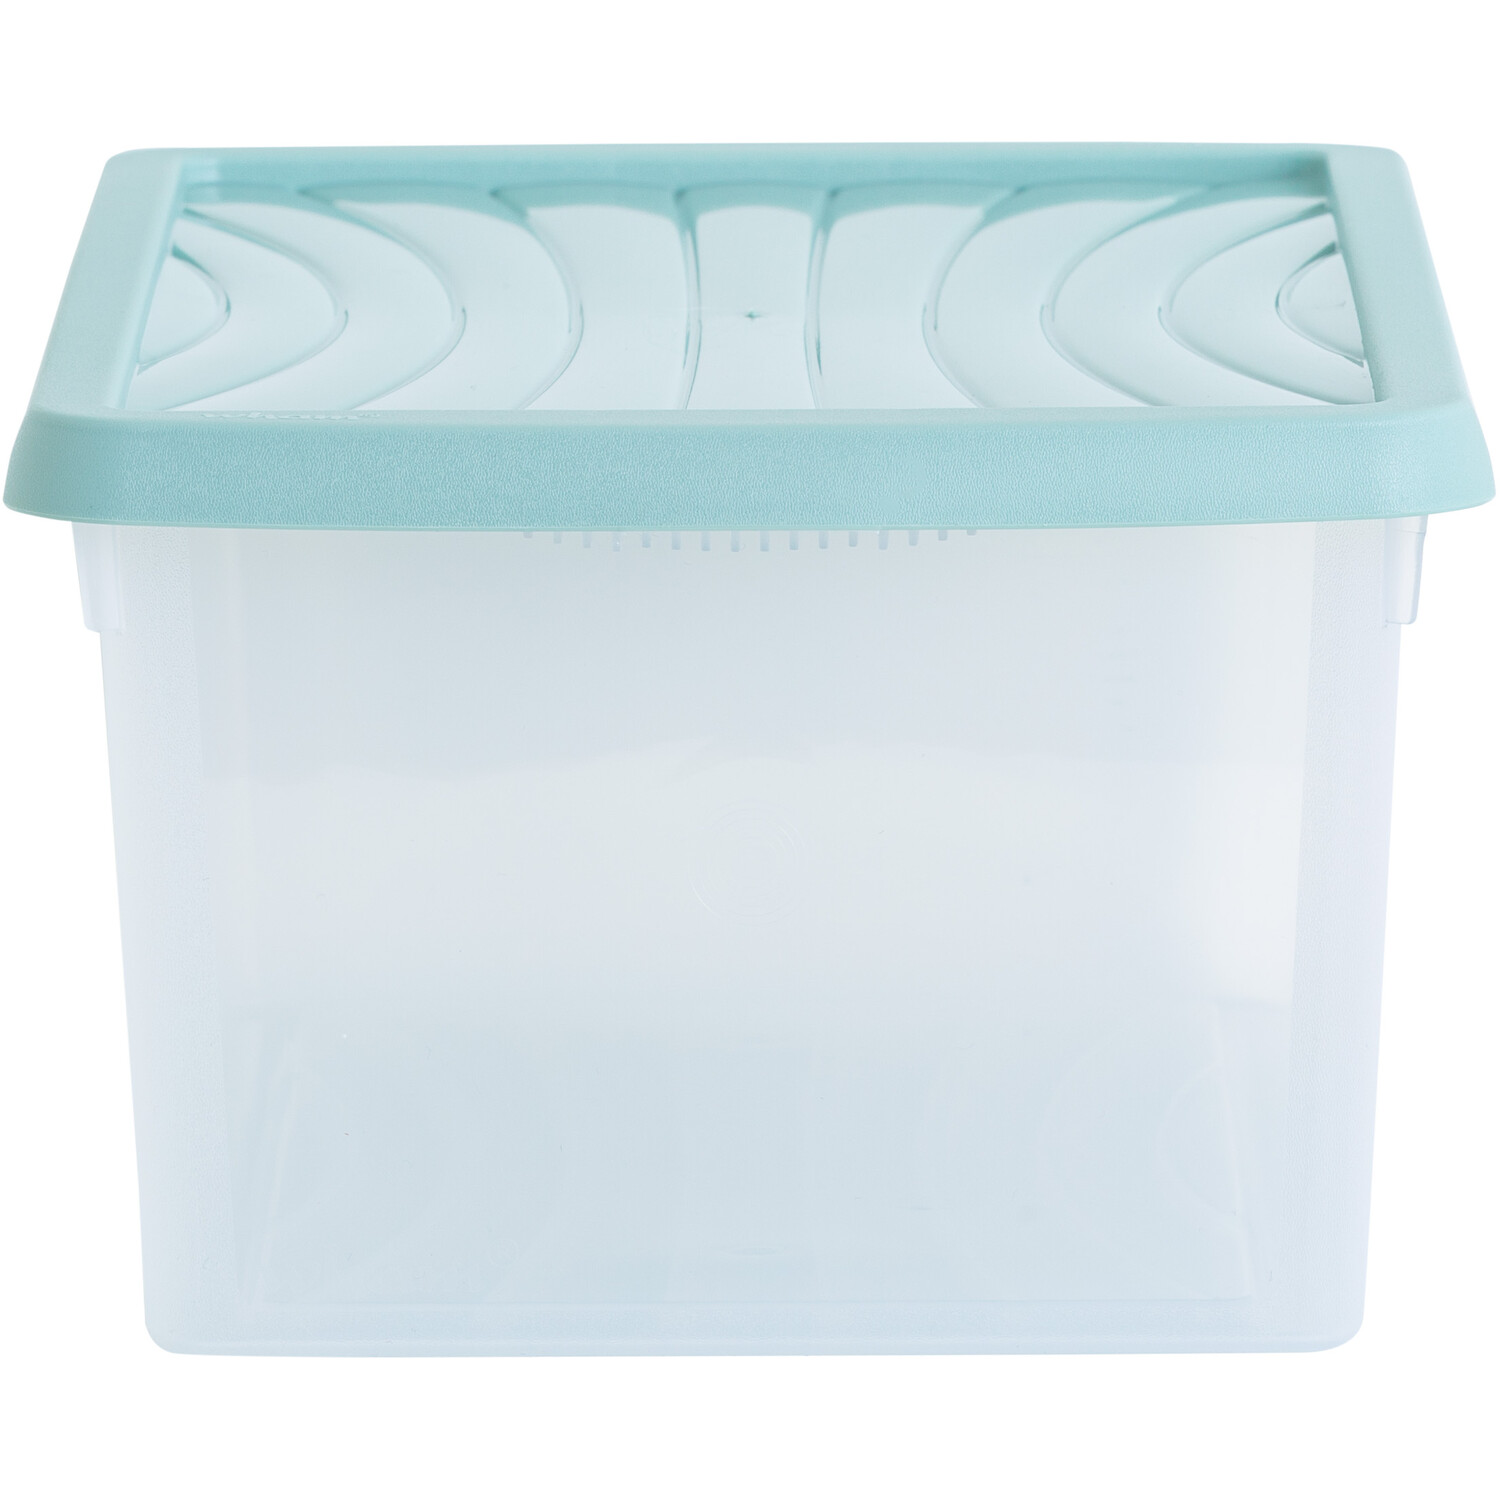 Single 9L Storage Box with Clip On Lid in Assorted styles Image 5